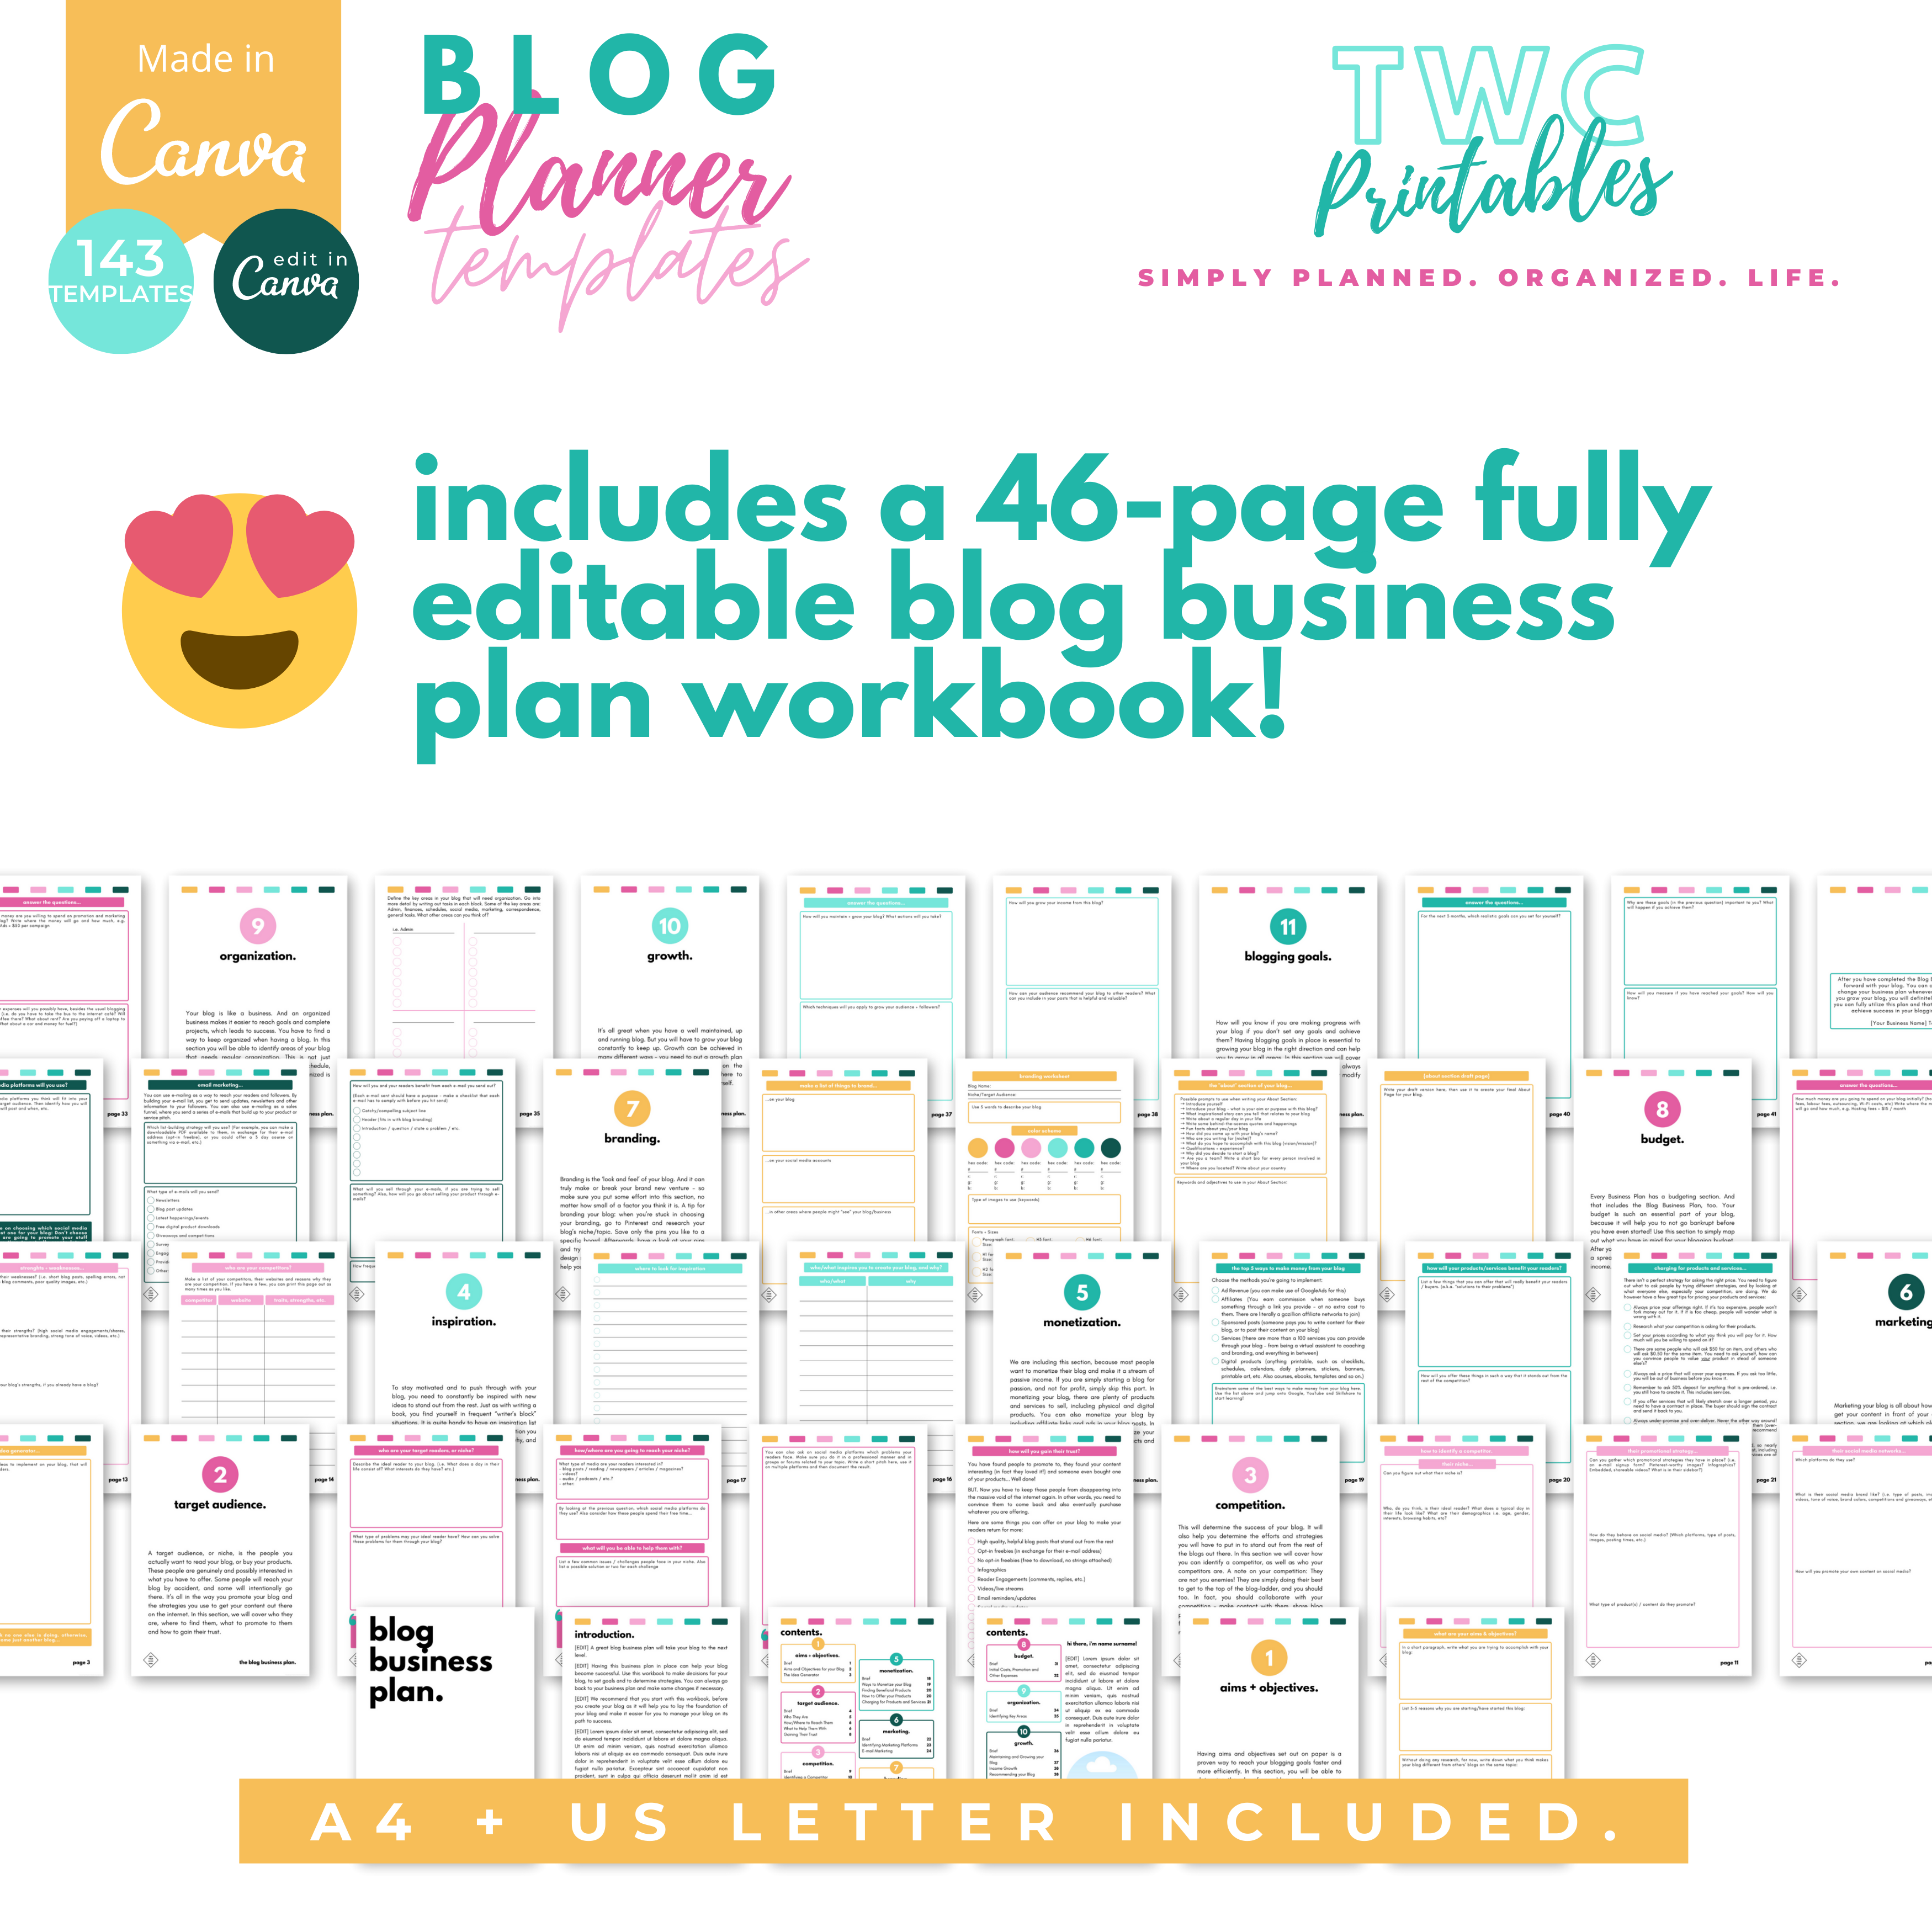 Plan and manage your blog with these handy editable blog planner templates for Canva! These sheets will help you to keep track of your blog stats, posts, sharing your blog content on social media, manage your blog like a business and so much more! You can change everything from colors to fonts, text, elements, etc. all you need is a free Canva account.